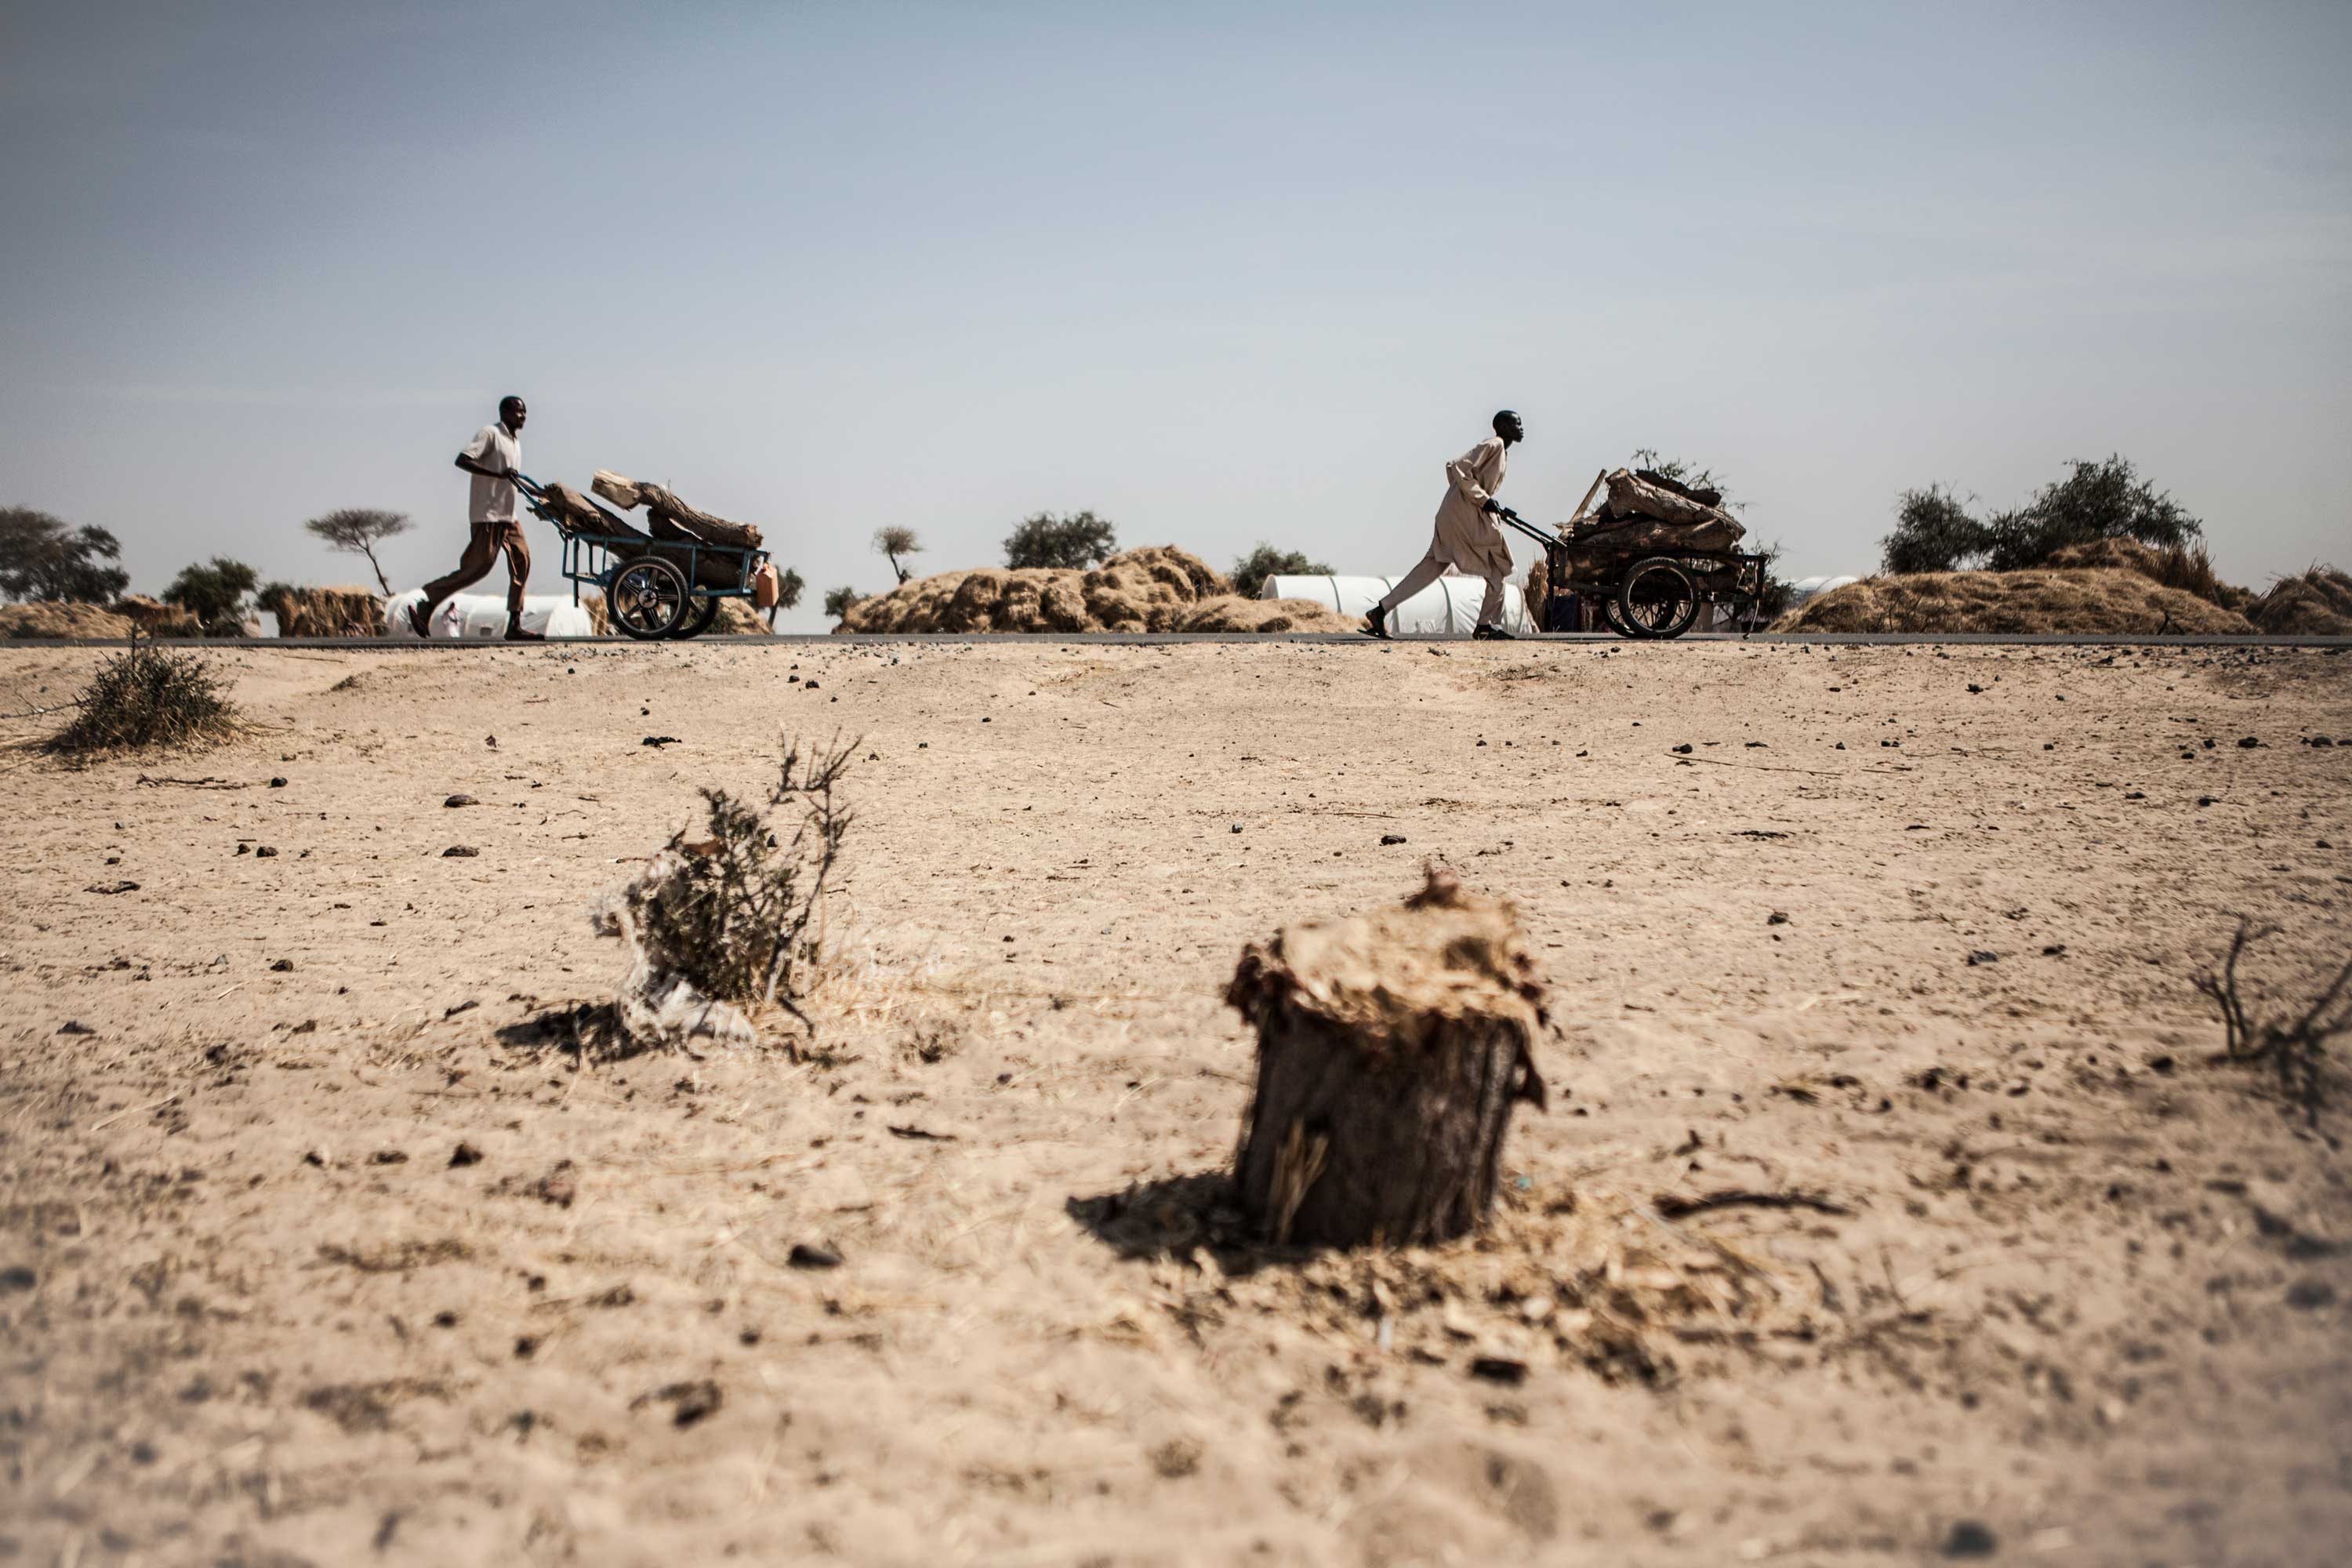 Men push wheelbarrows filled with chopped wood to be sold at the market, outside of Garin Wanzam Camp in Diffa, Niger.